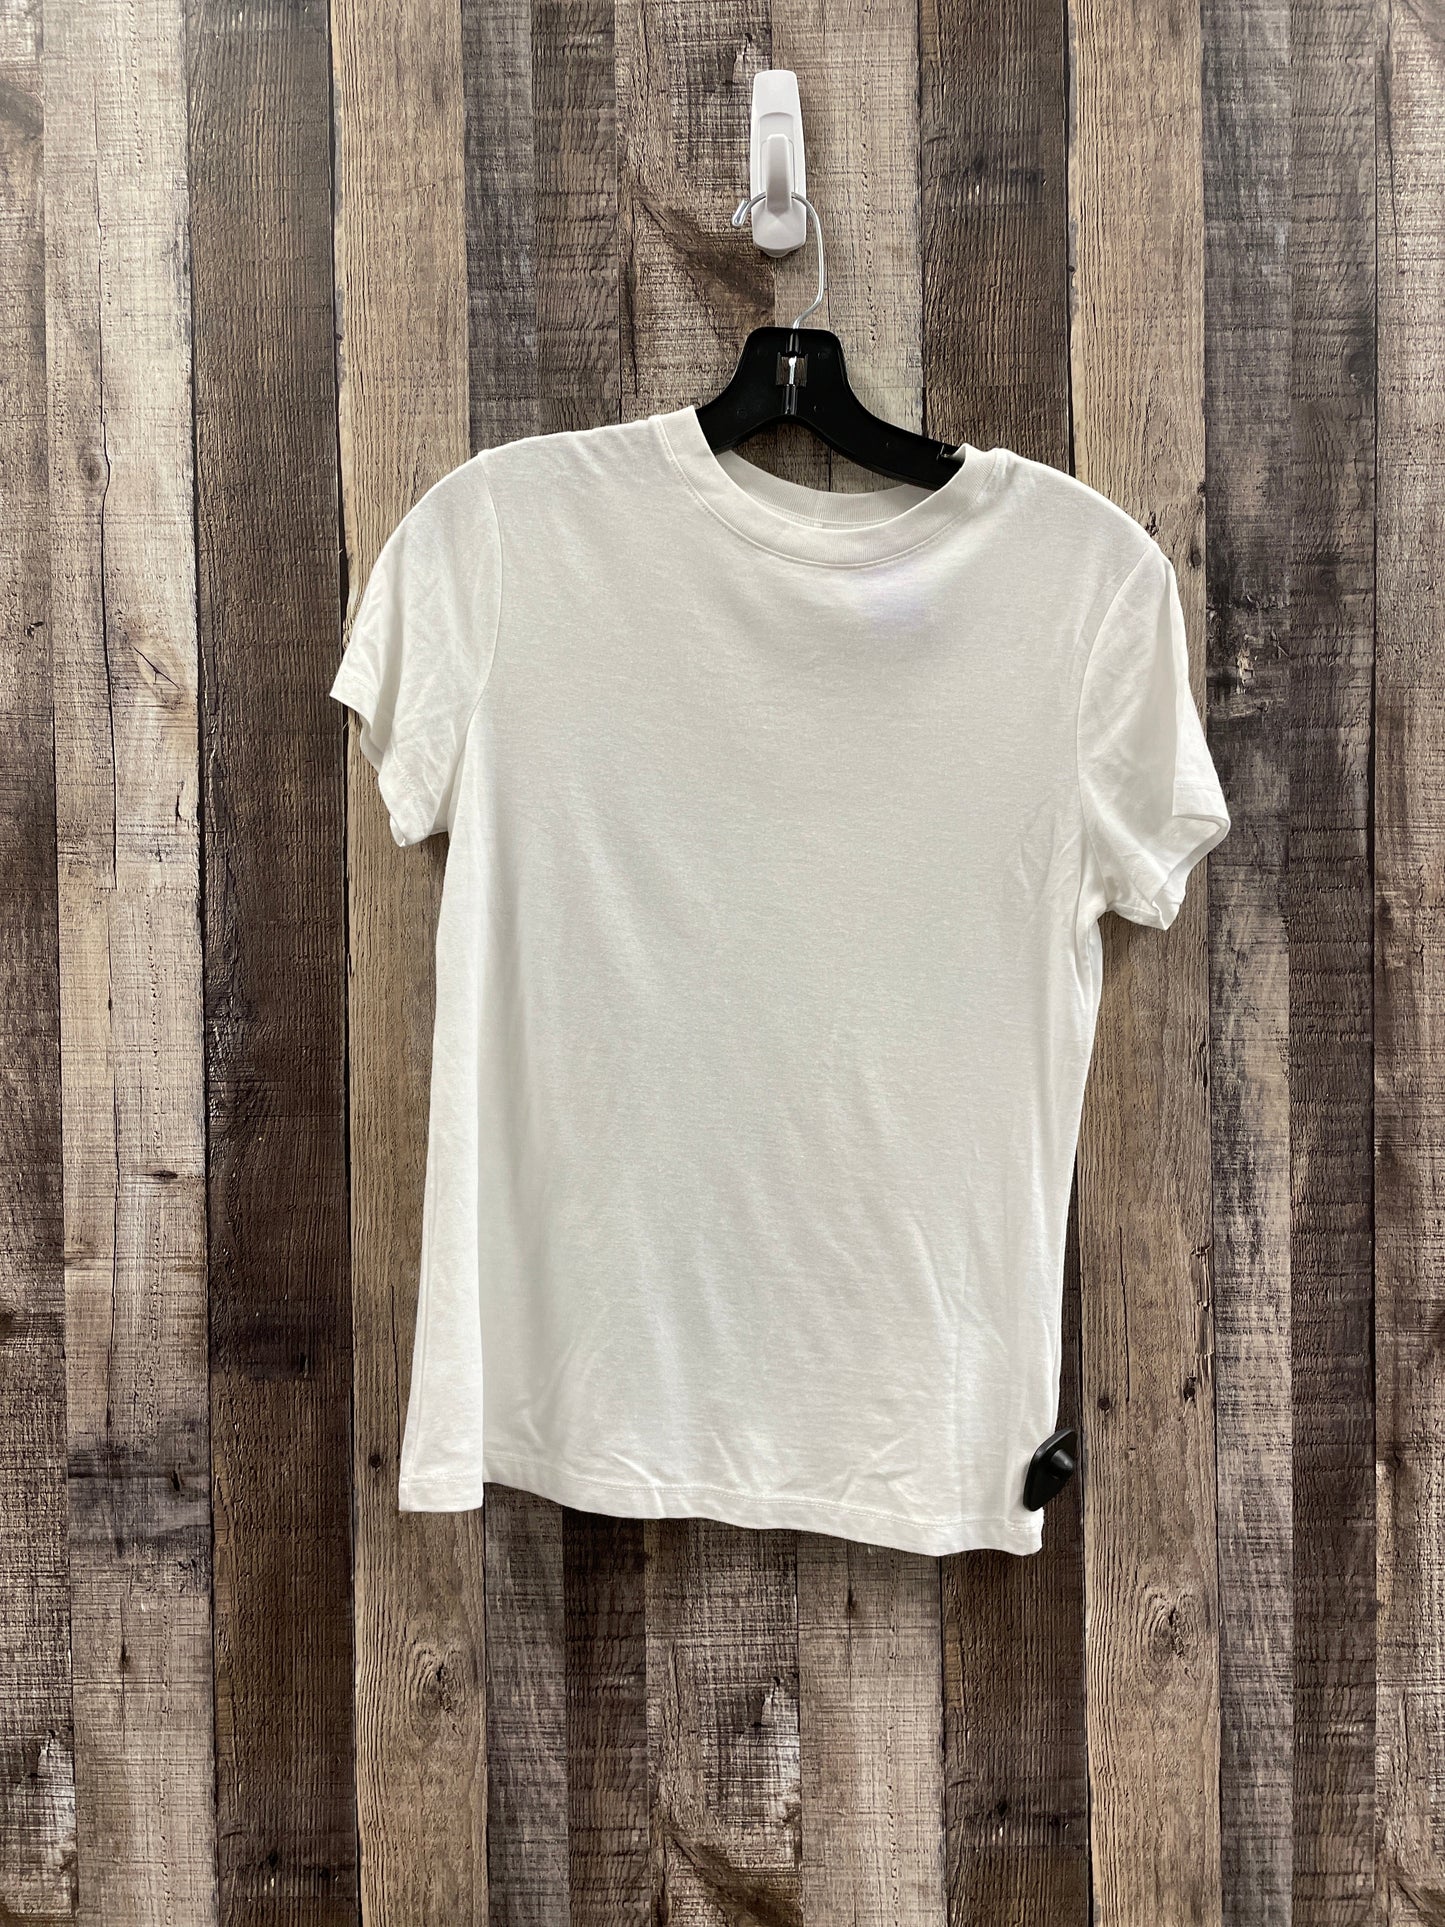 White Top Short Sleeve A New Day, Size Xs